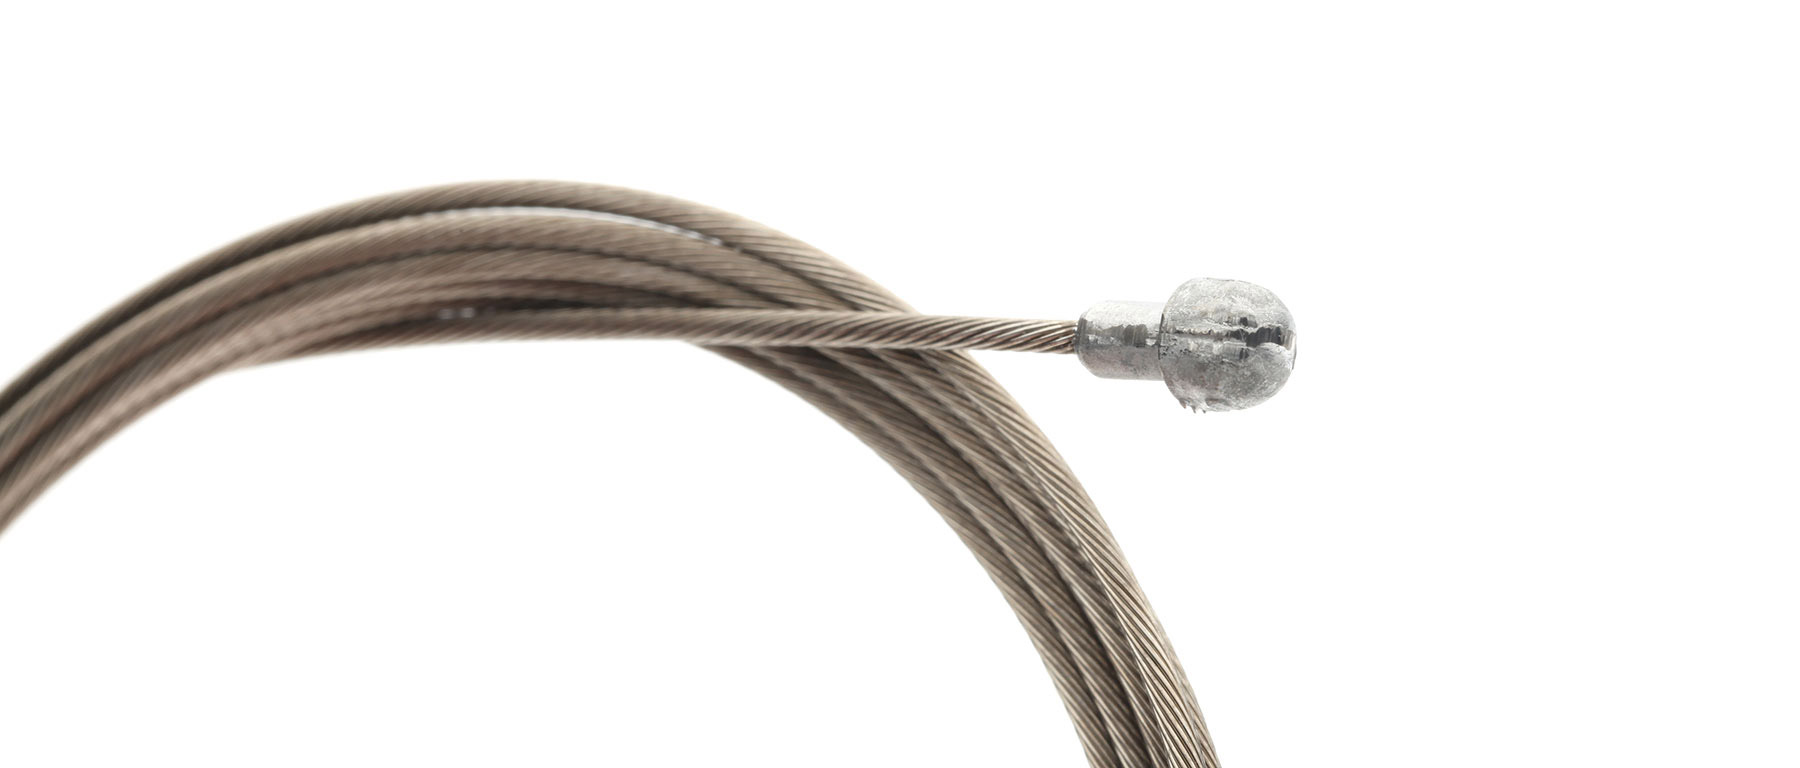 Shimano Stainless Steel Road Brake Cable